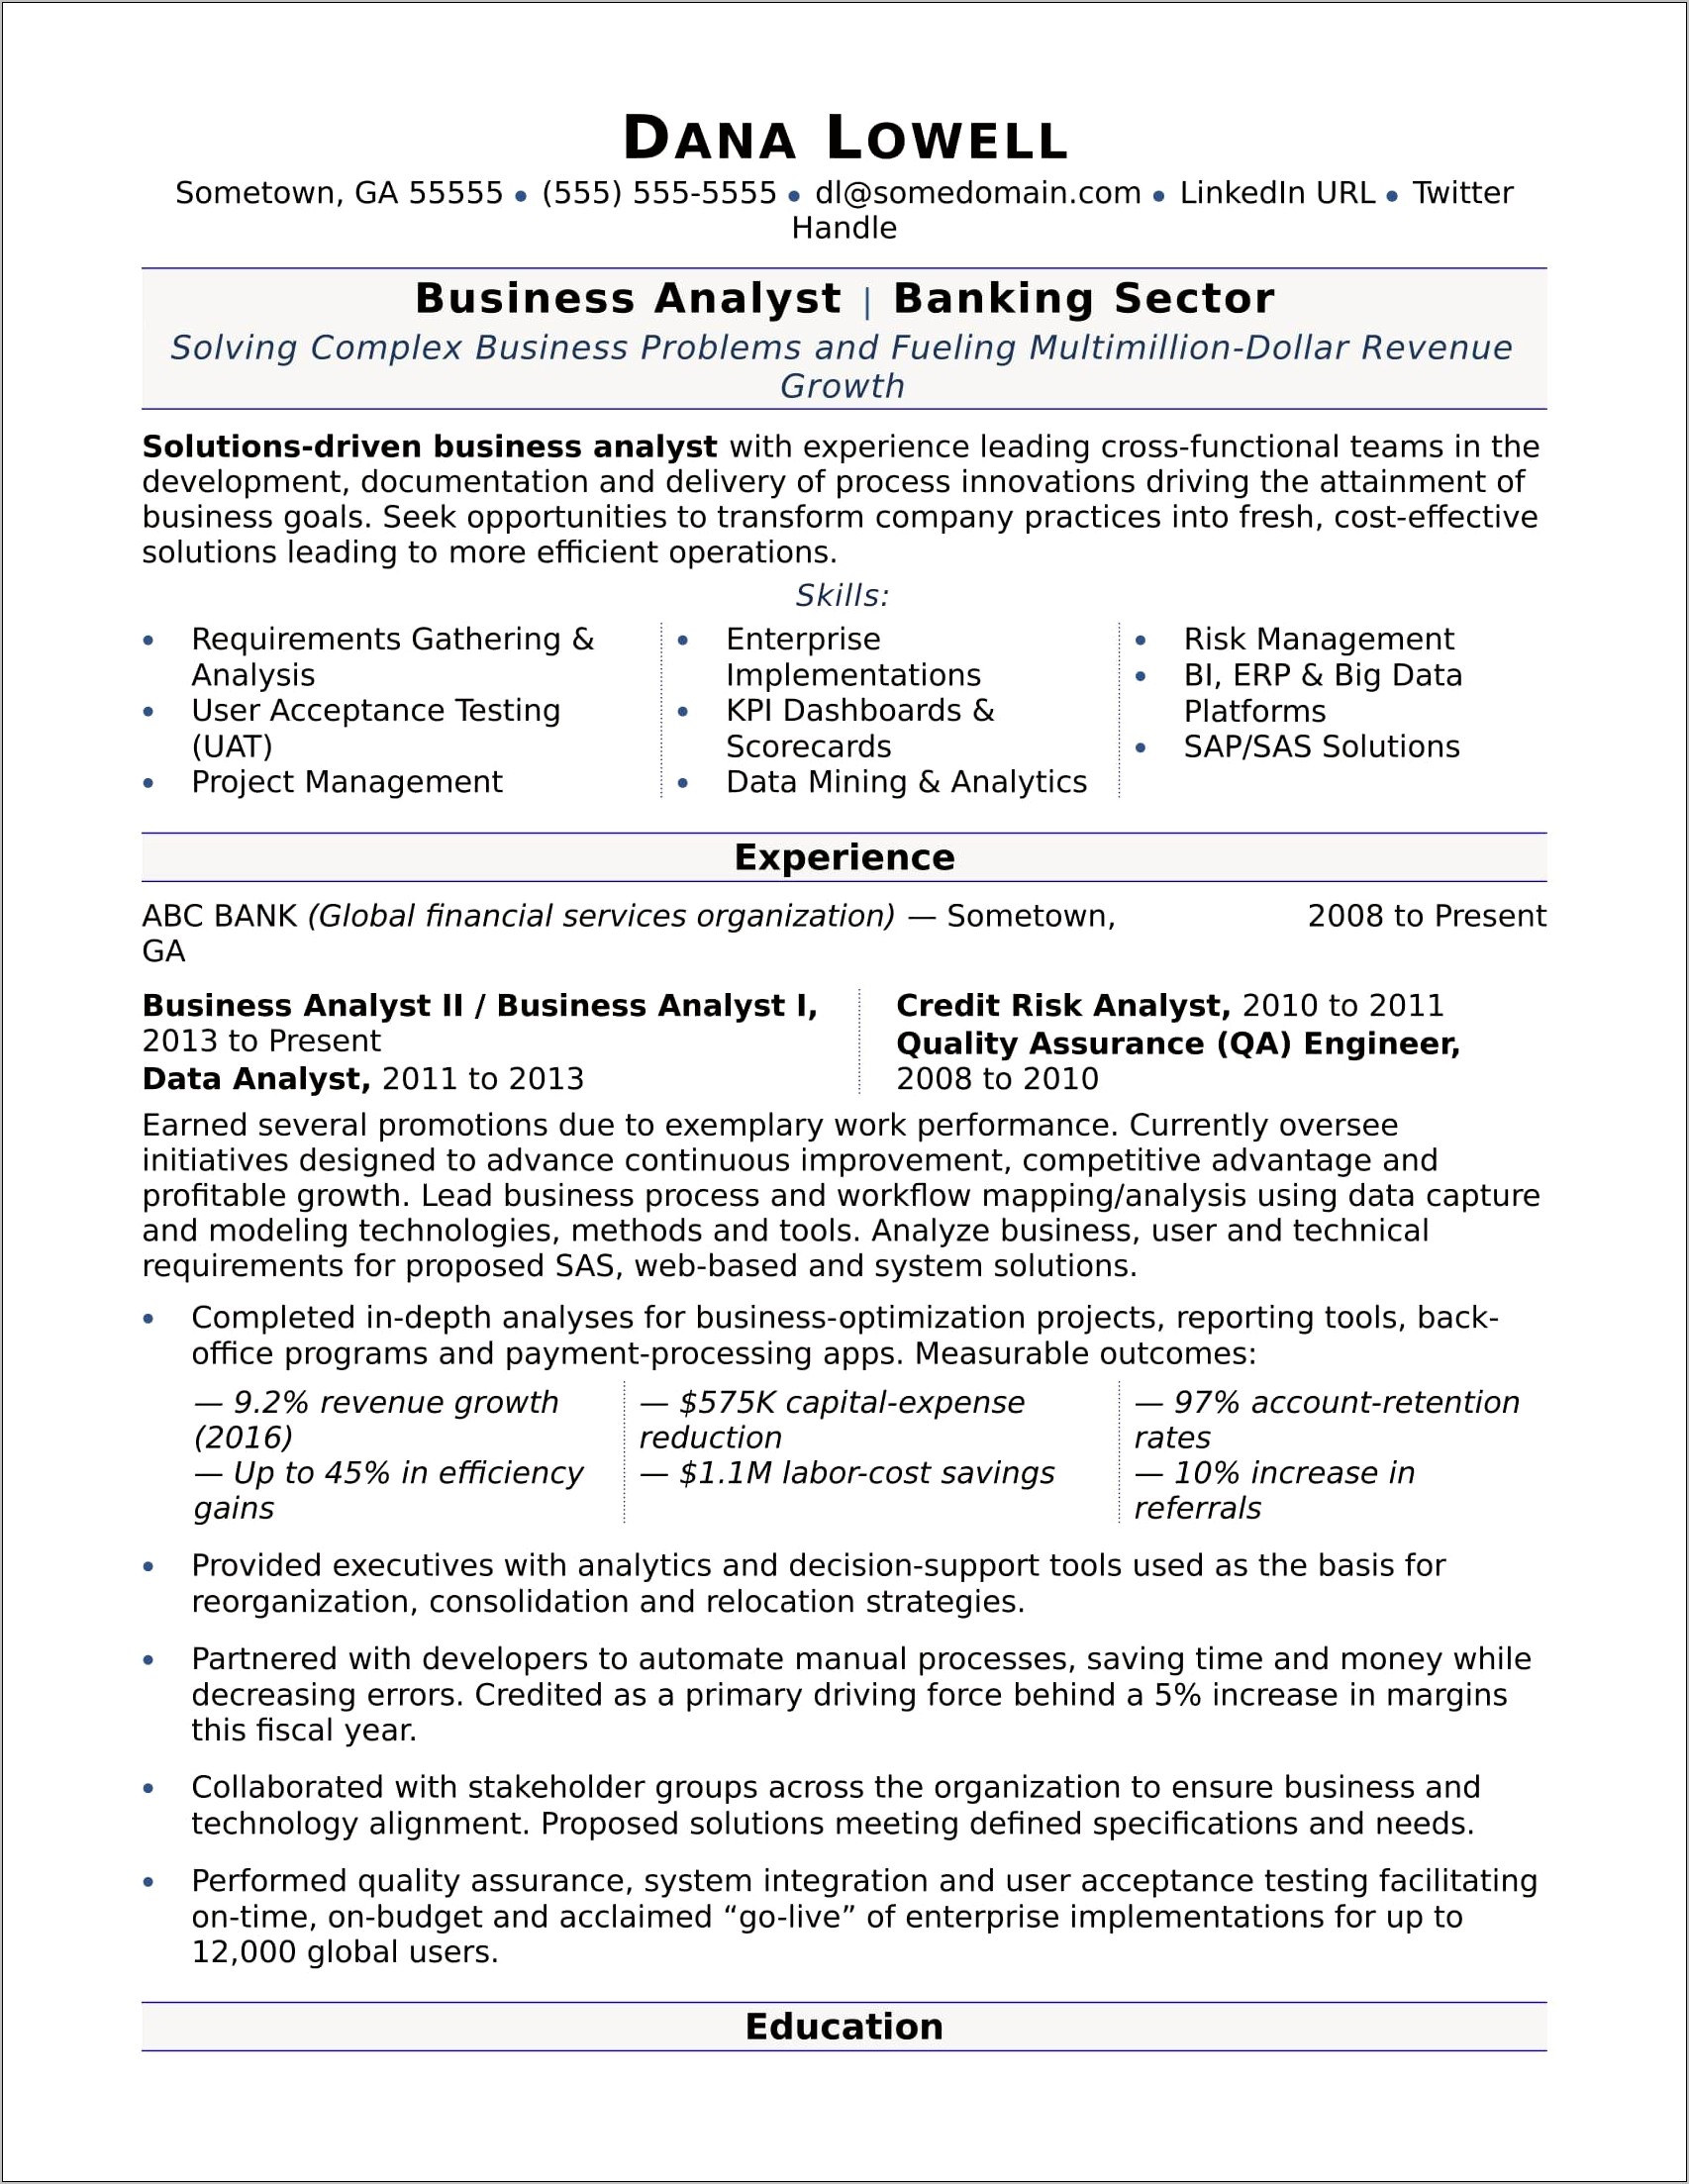 General Resume Summary For Business Professional